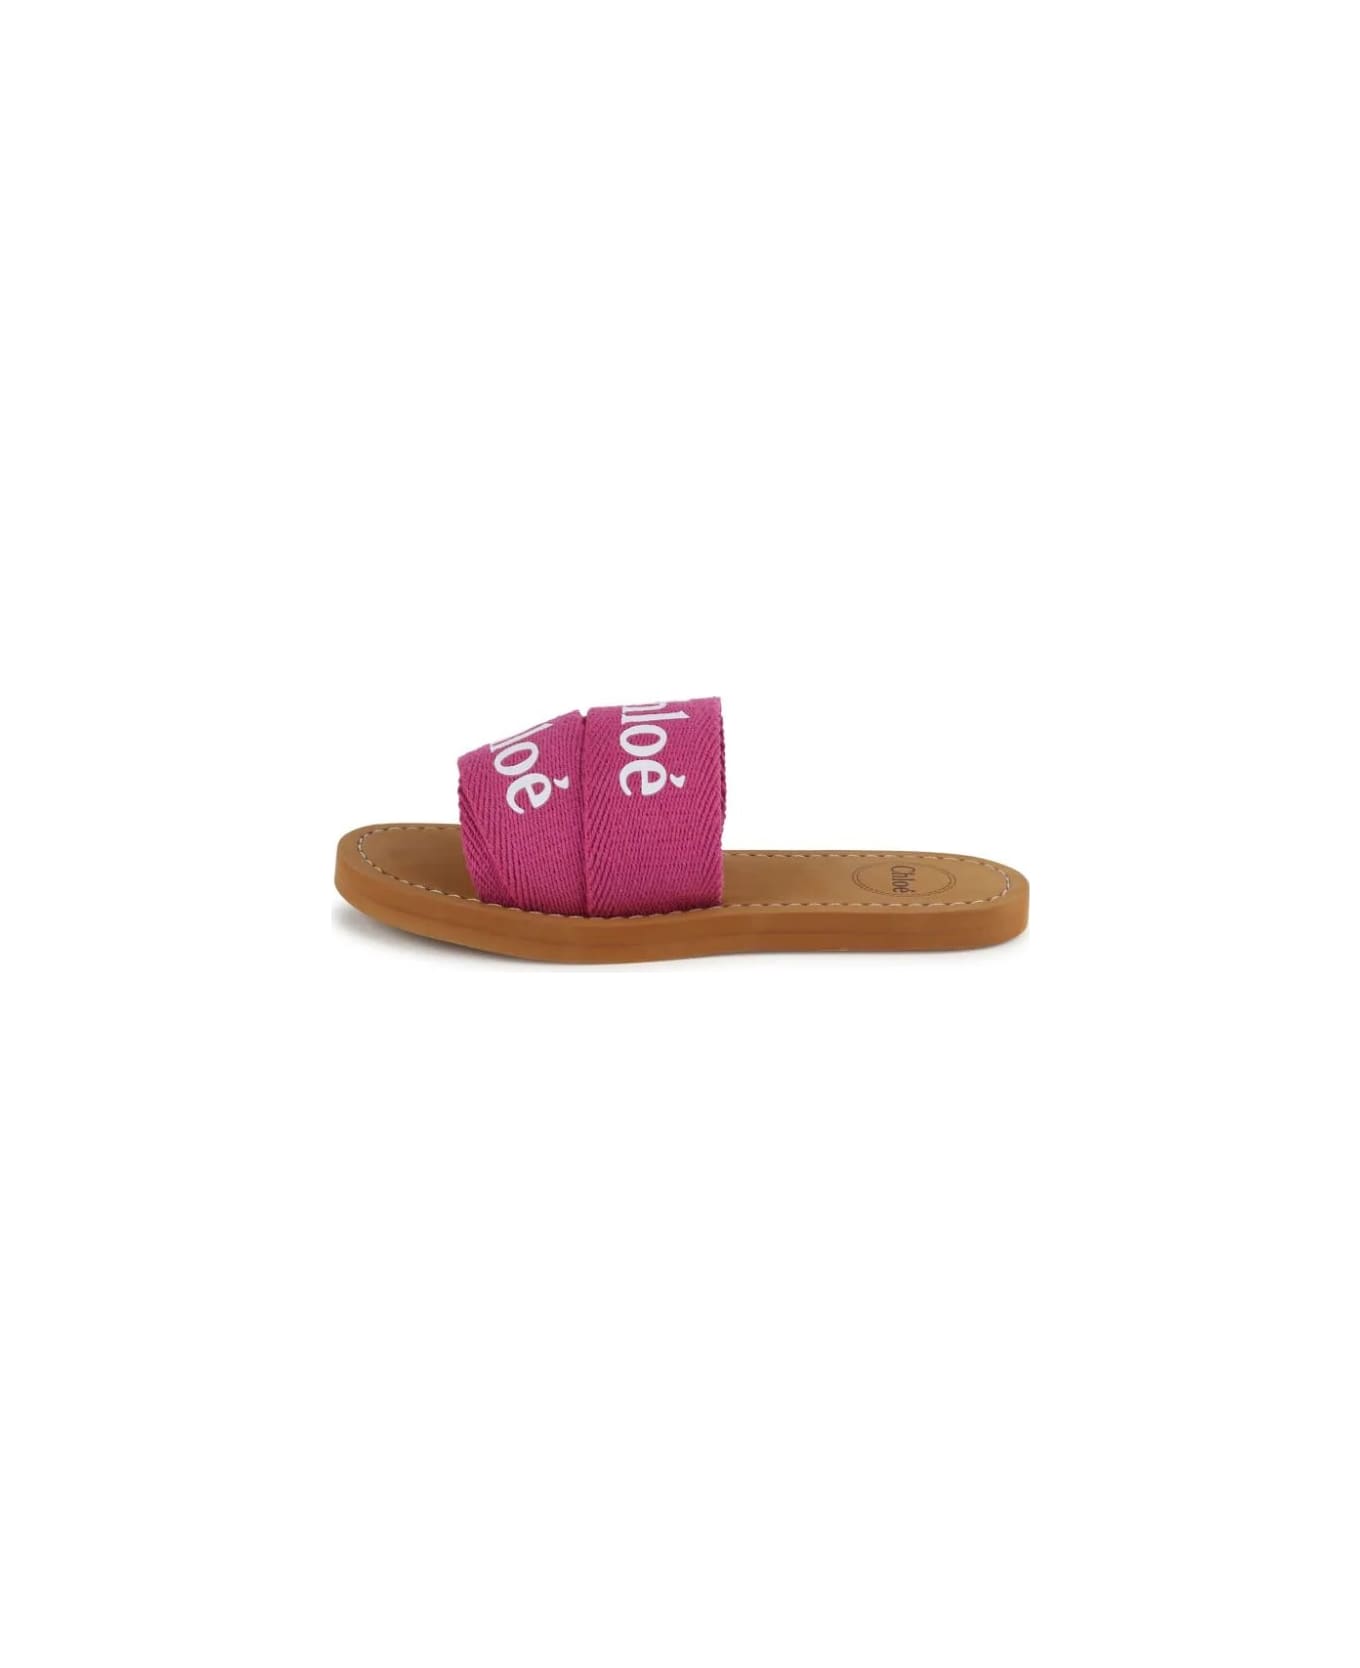 Chloé Woody Sandals In Fuchsia Canvas With Logo - Pink シューズ